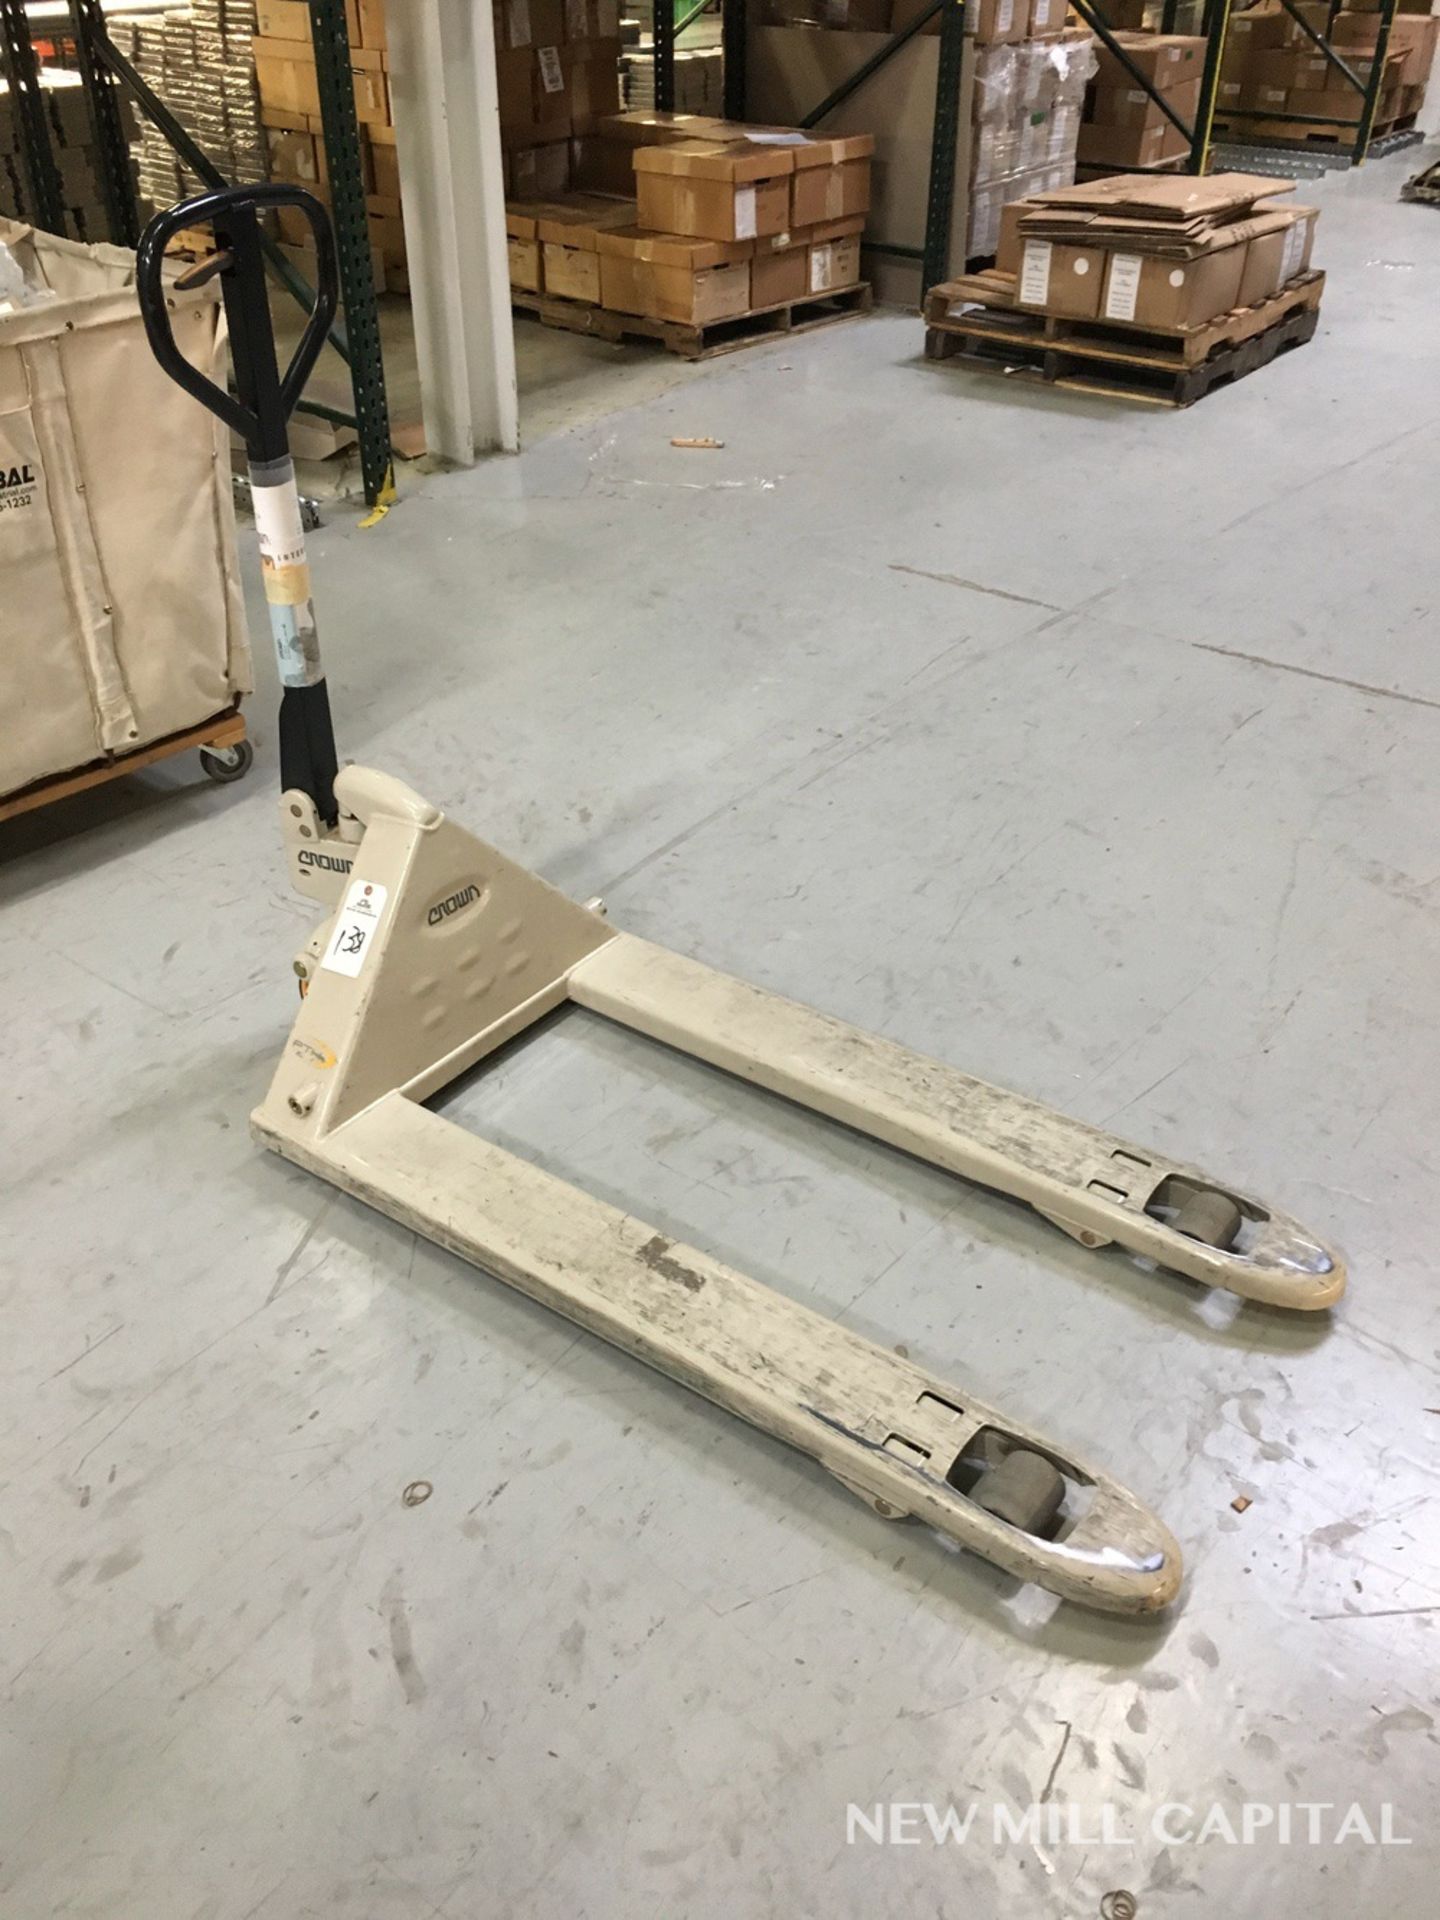 Crown Pallet Jack | Rig Fee: Hand Carry By Appointment or Contact Rigger for Quote